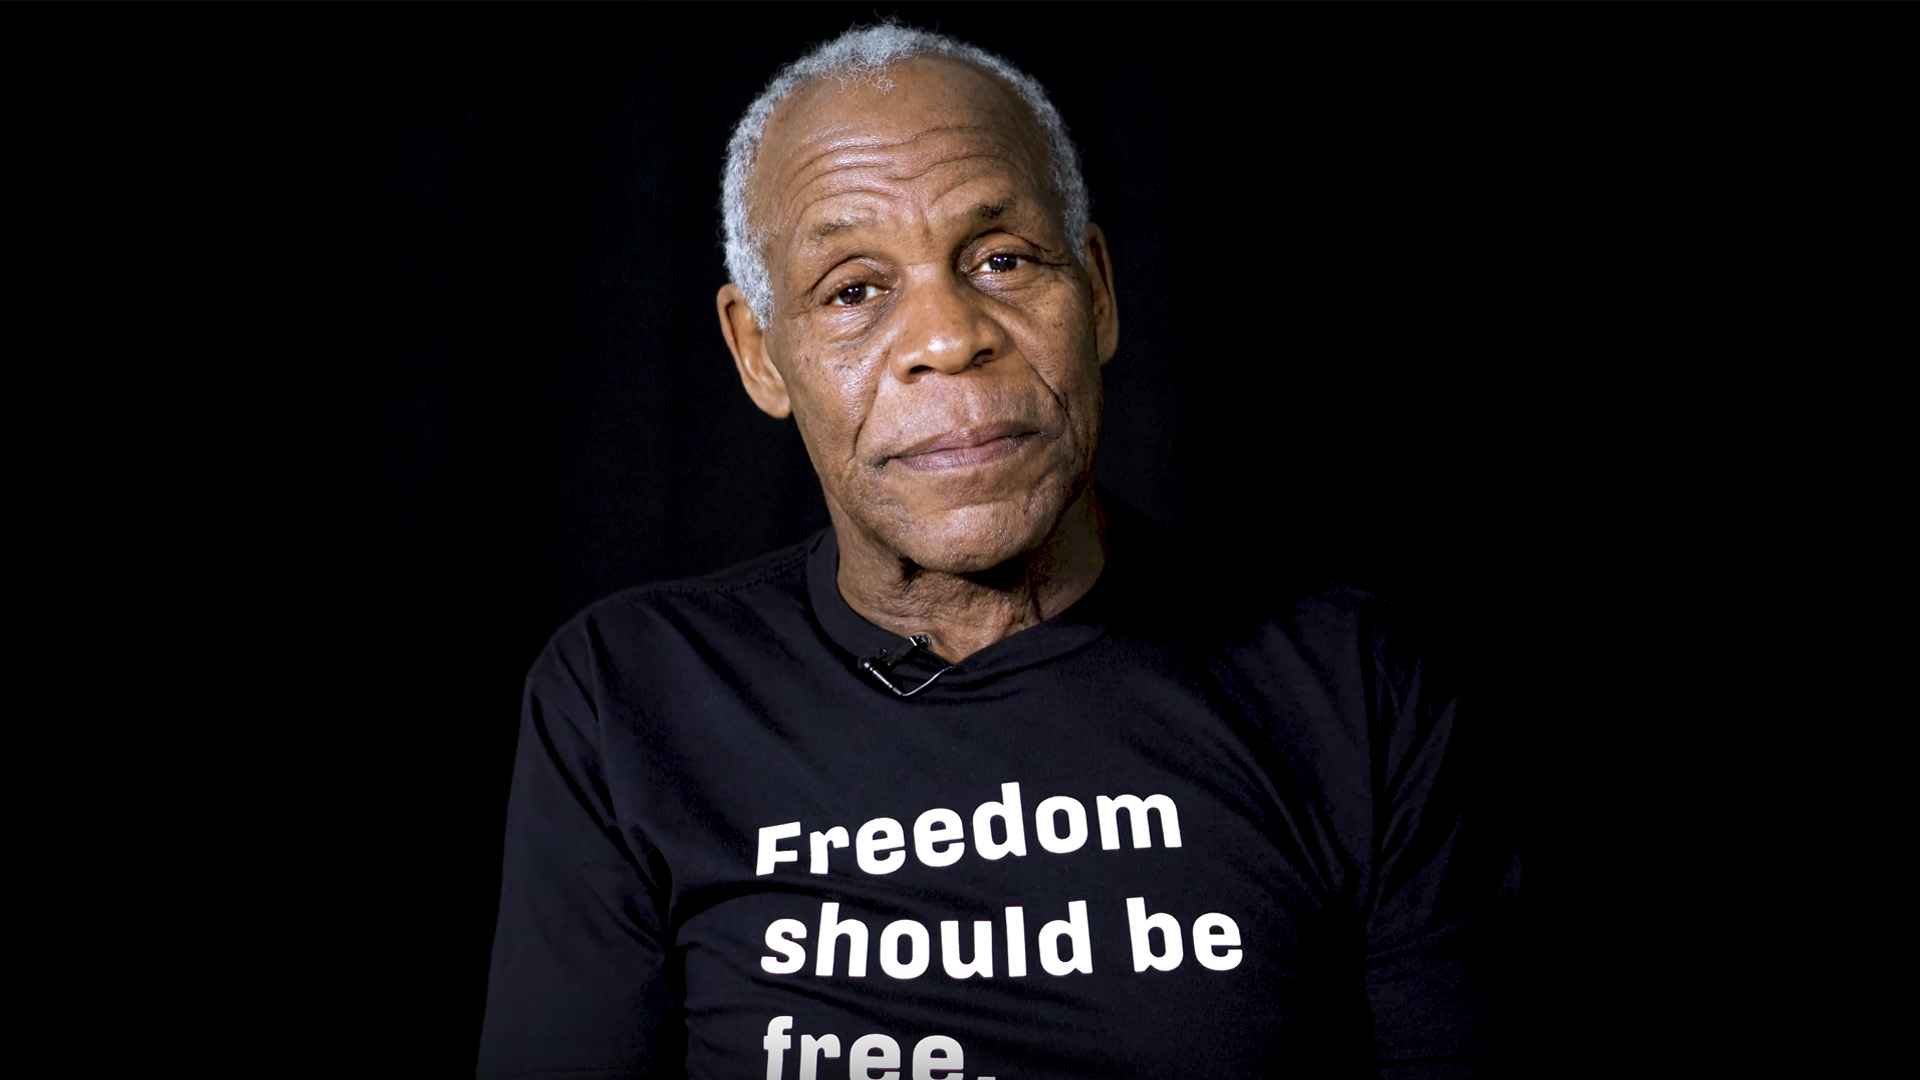 Danny Glover with a "Freedom should be free" shirt staring into the camera, against a black background